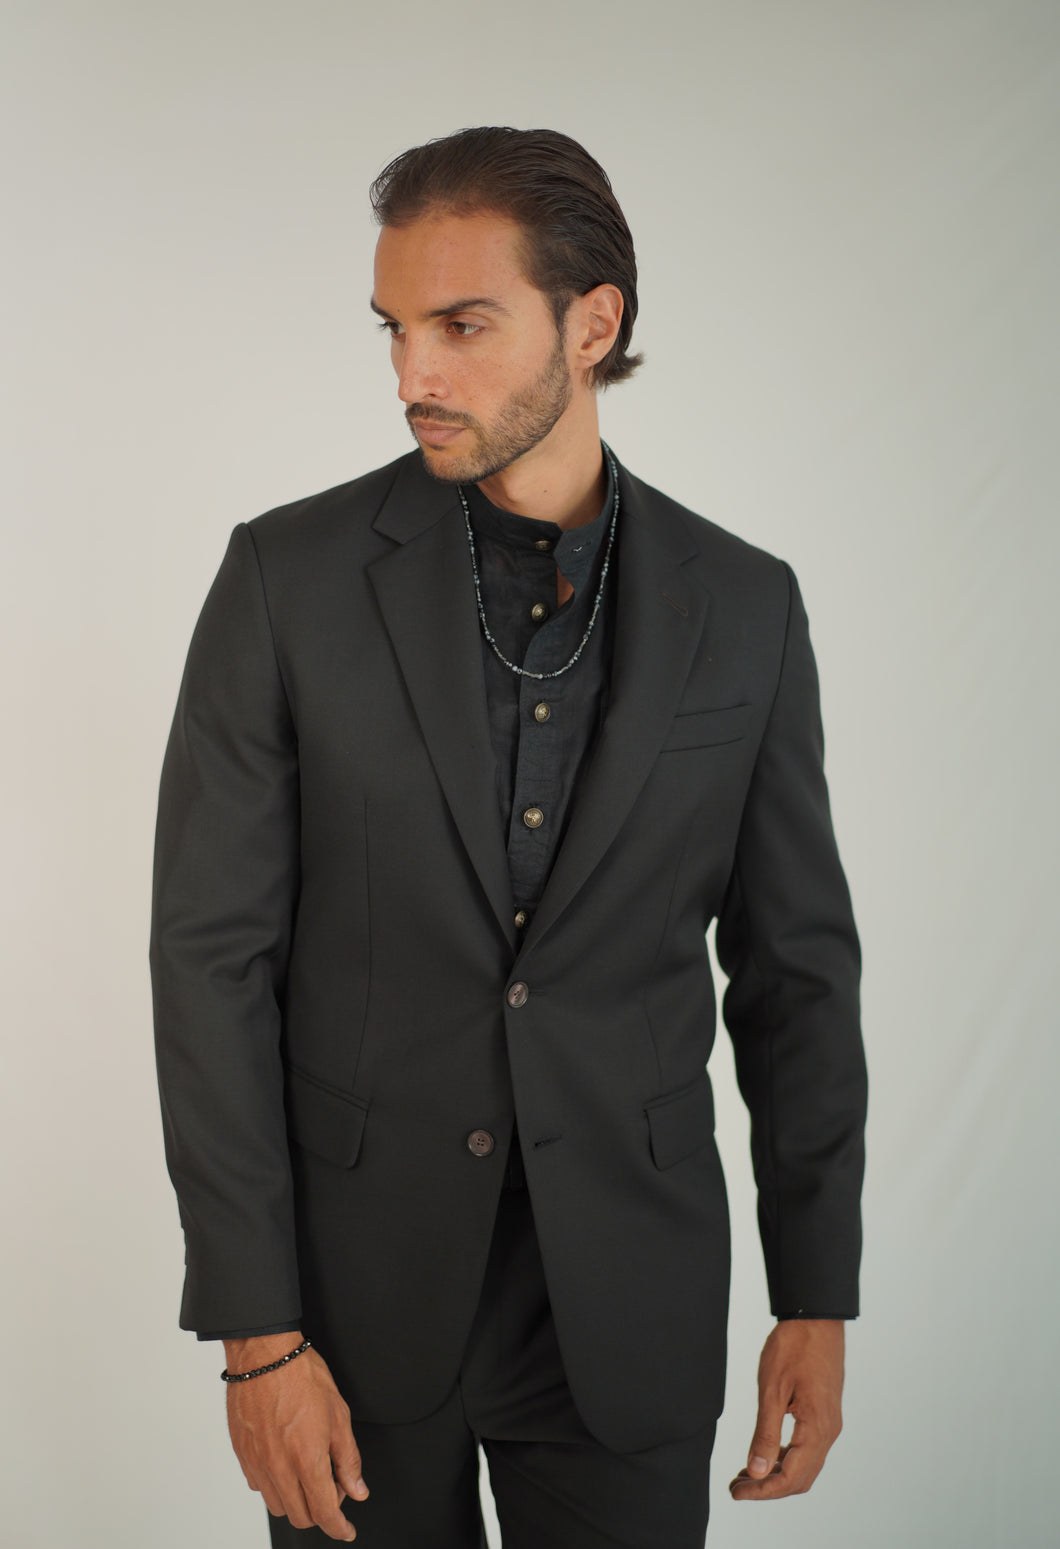 Mens Wool/Cashmere Suit Tailored 2 Button